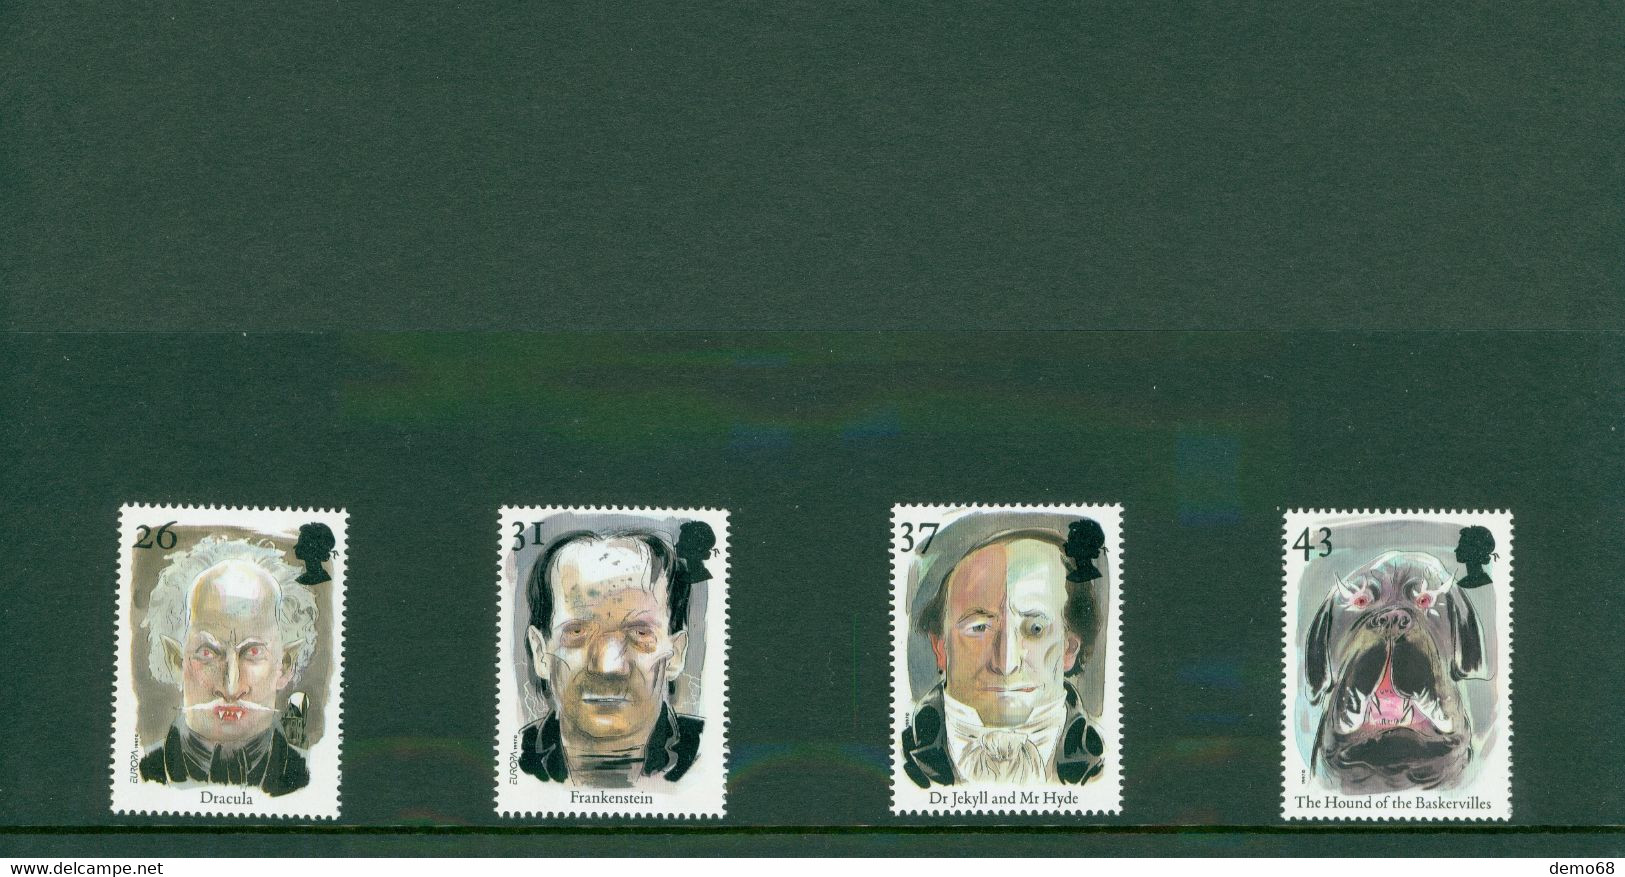 Stamp Timbre England Great Britain British Tales Of Terror Dracula Dr Jeckyll Frankenst. GB New 4 Royal Mail Mint Stamps - Collezioni